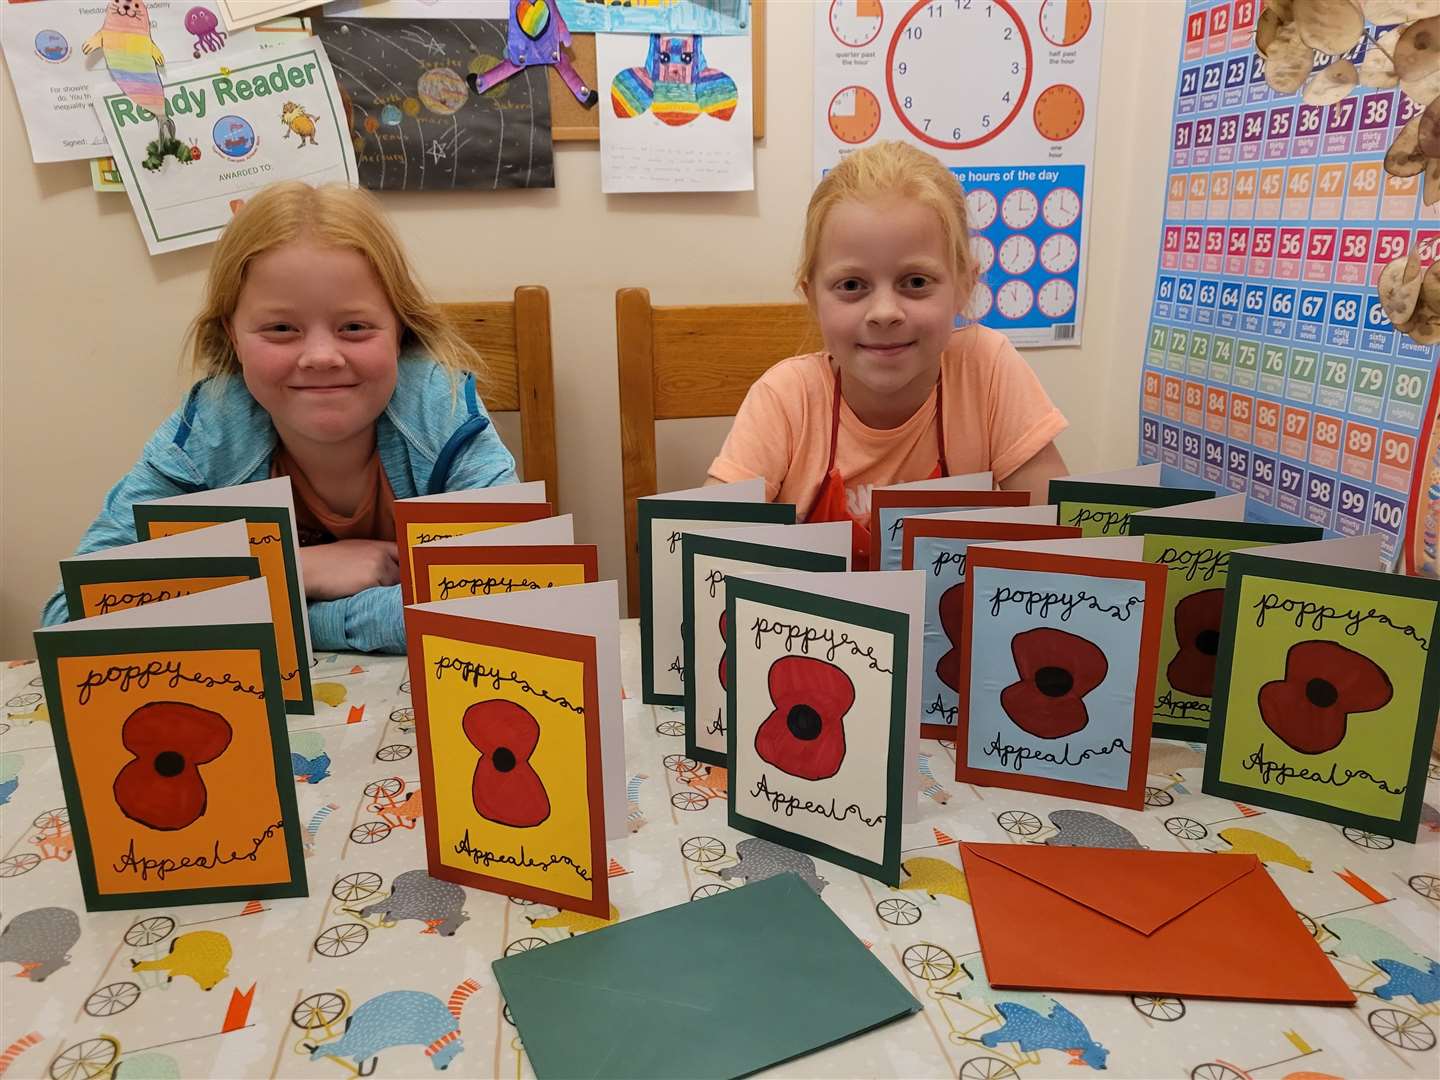 The sisters with their handmade cards for their Poppy Appeal